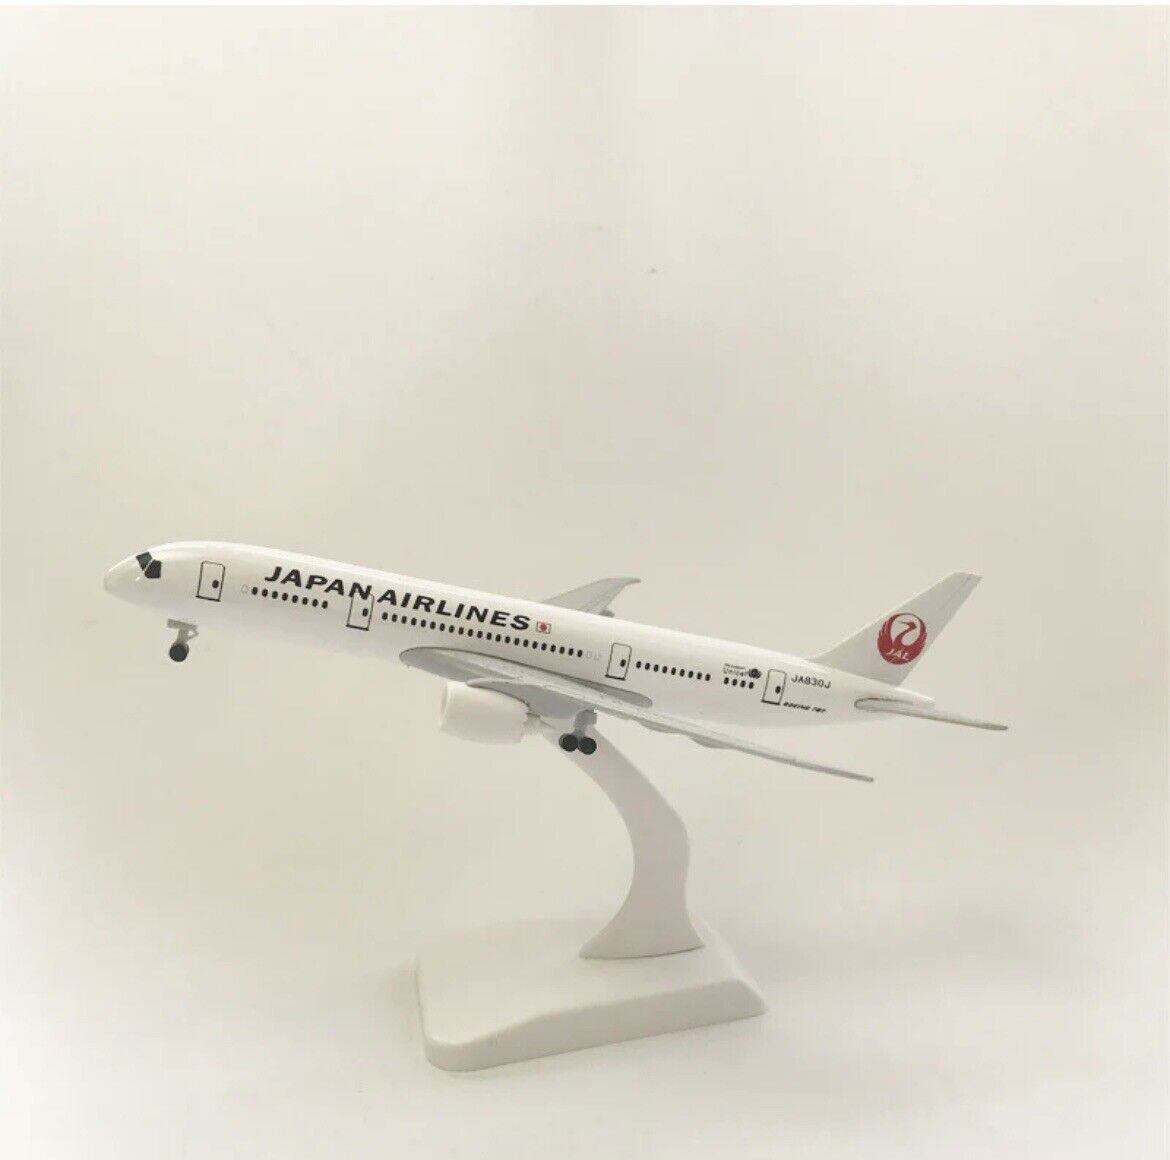 1:400 Japan Airlines B787 Airplane Model Diecast Toy Plane